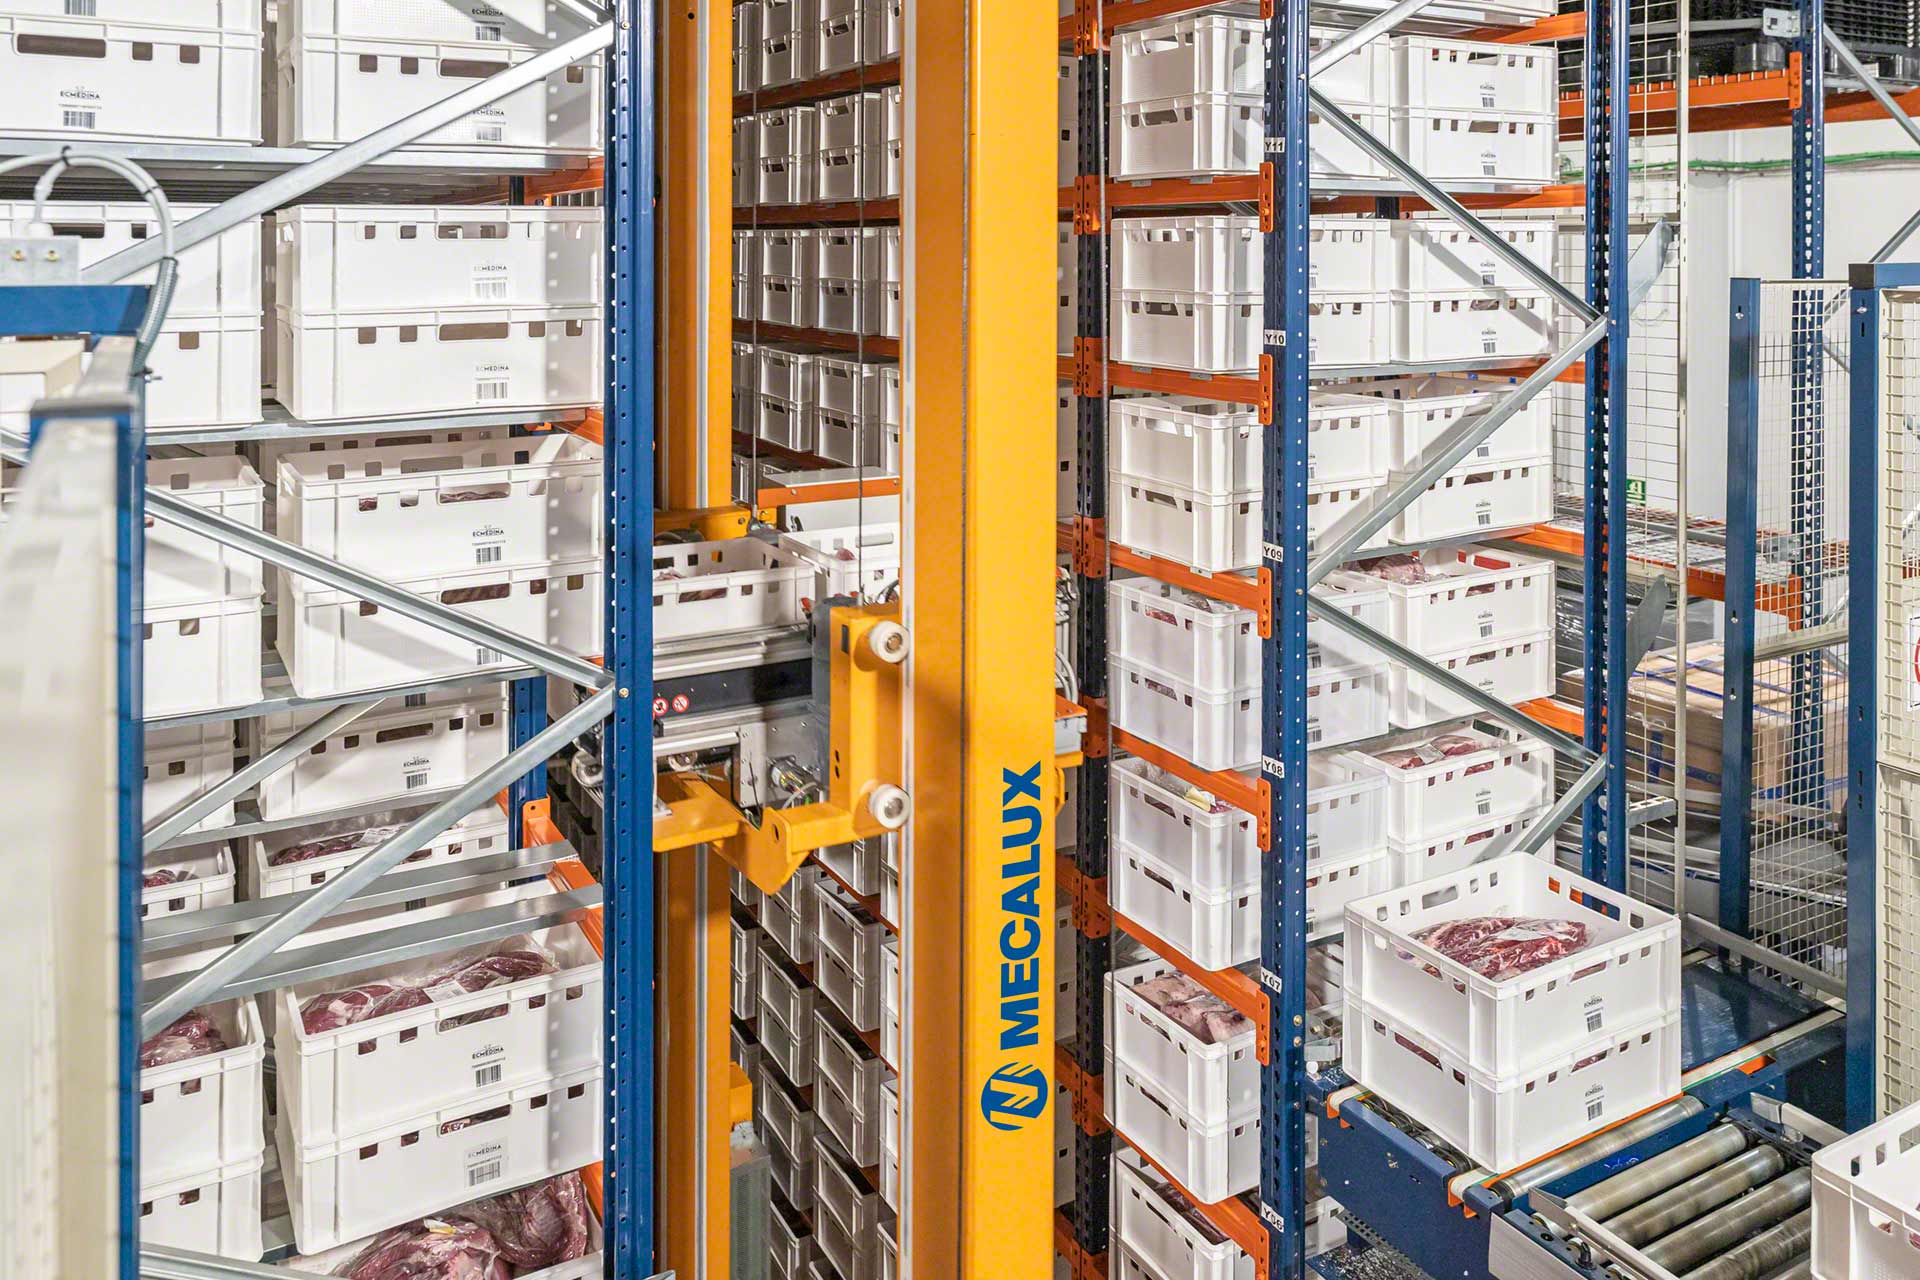 Combined cycles of stacker cranes: capacity vs. speed